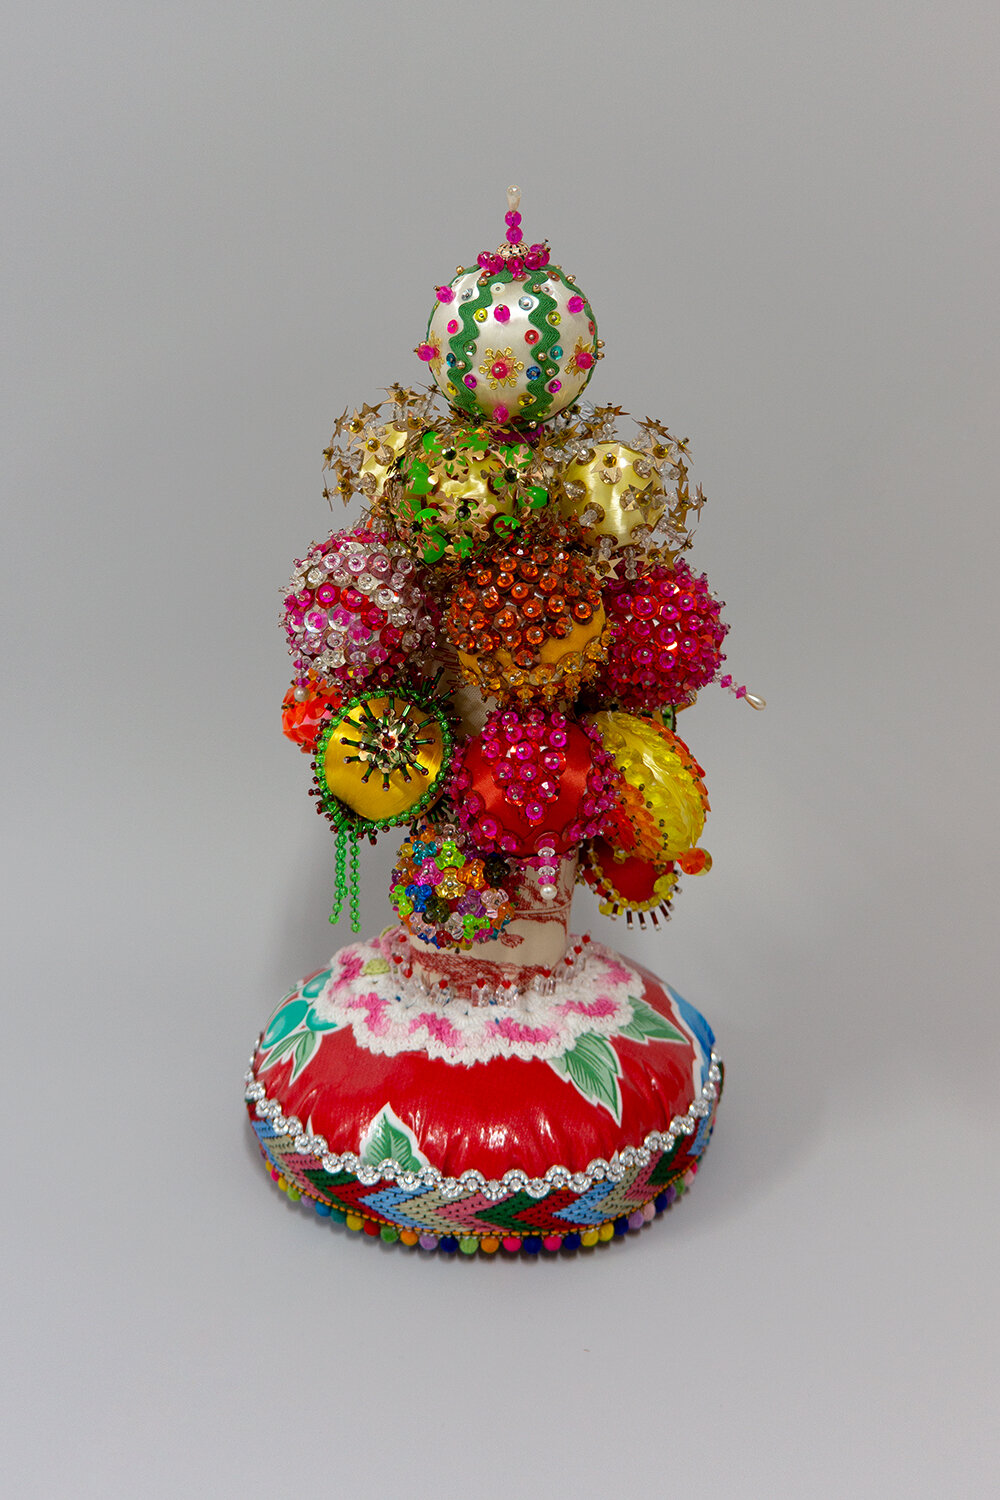   Grandstand , 2019, Crystal and plastic beads, found fabric, trim, ornaments, polyester batting, thread, 14.5 x 8 x 8” 